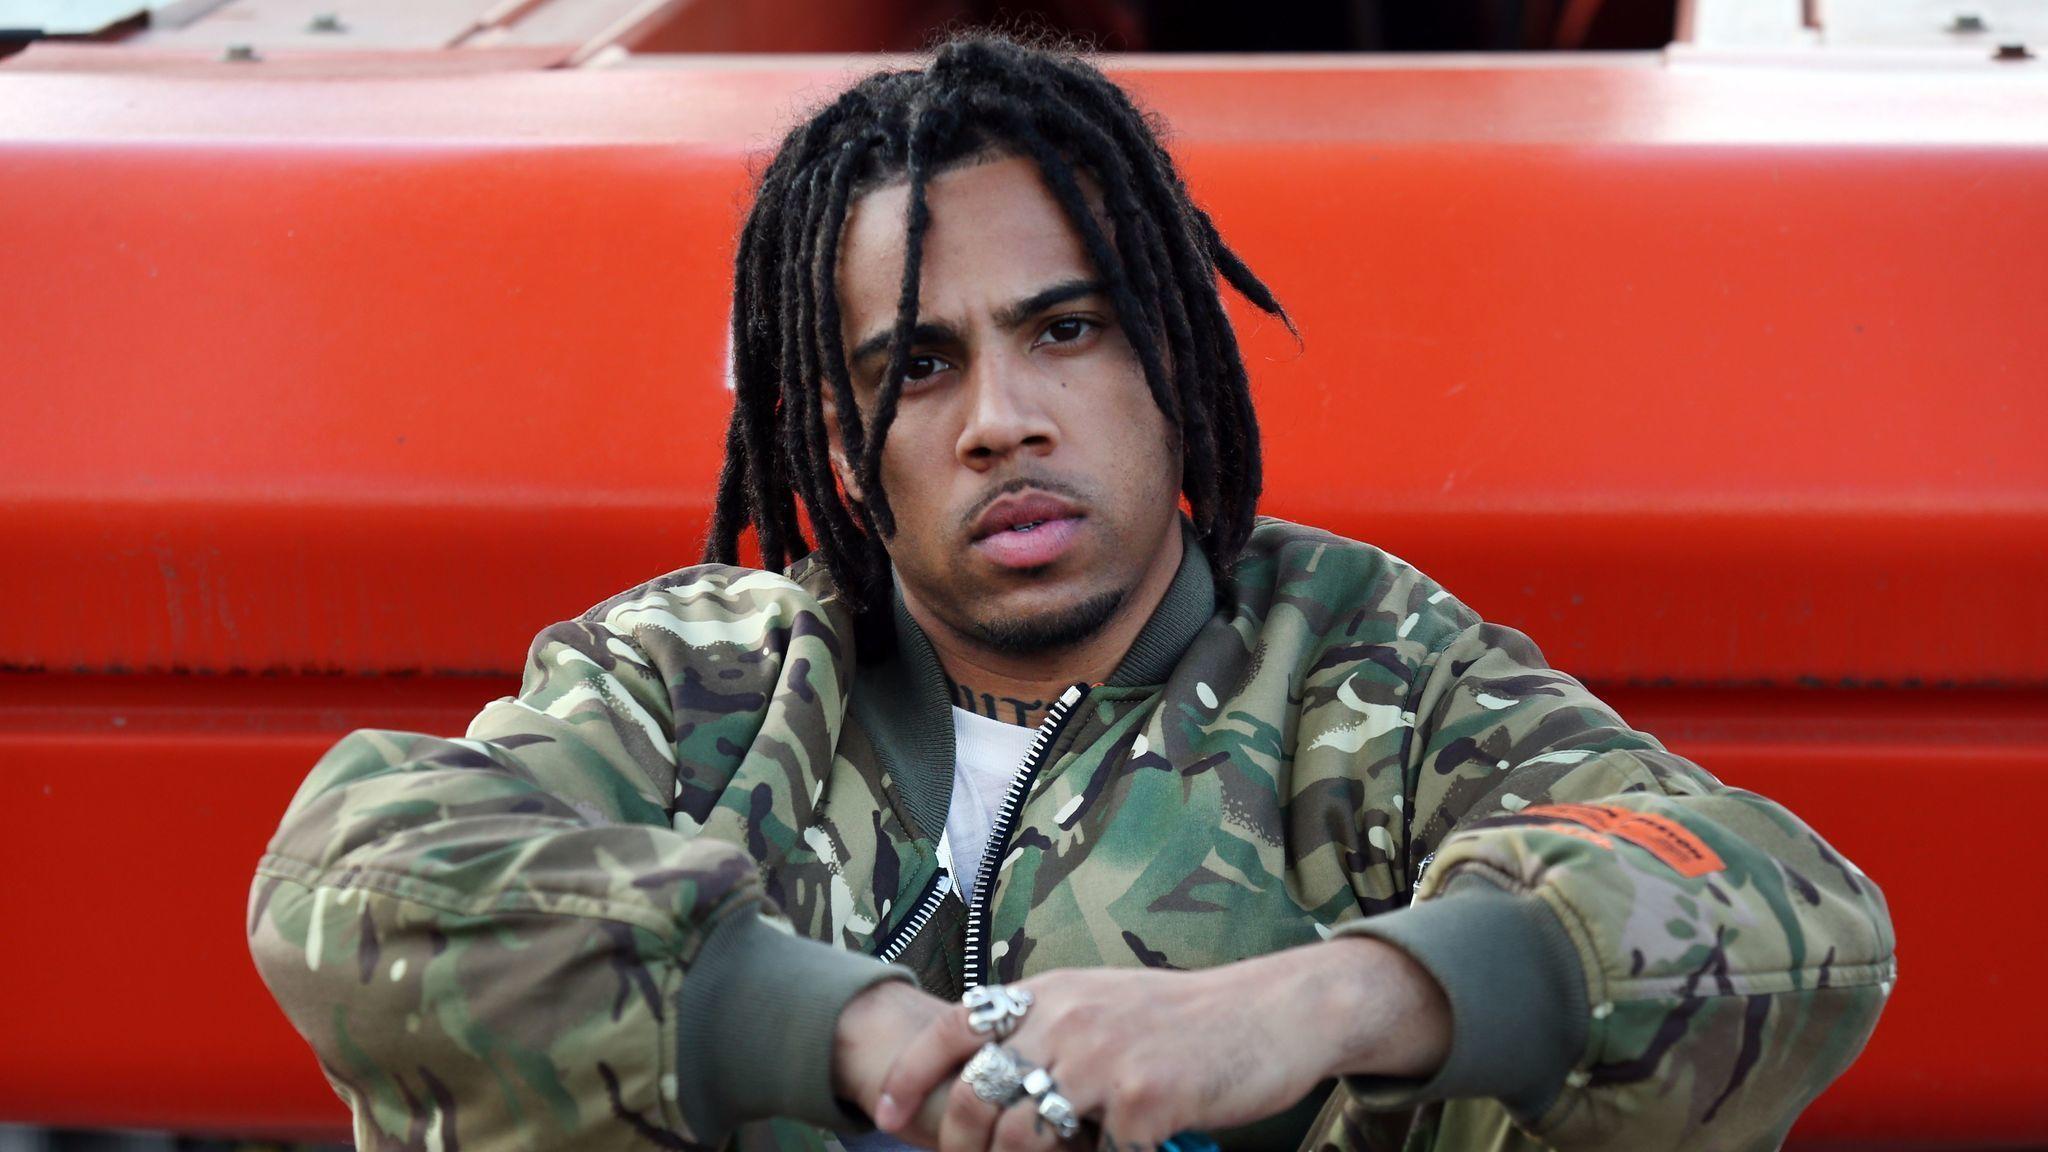 Vic Mensa will sign your copy of his CD at Reckless Records today